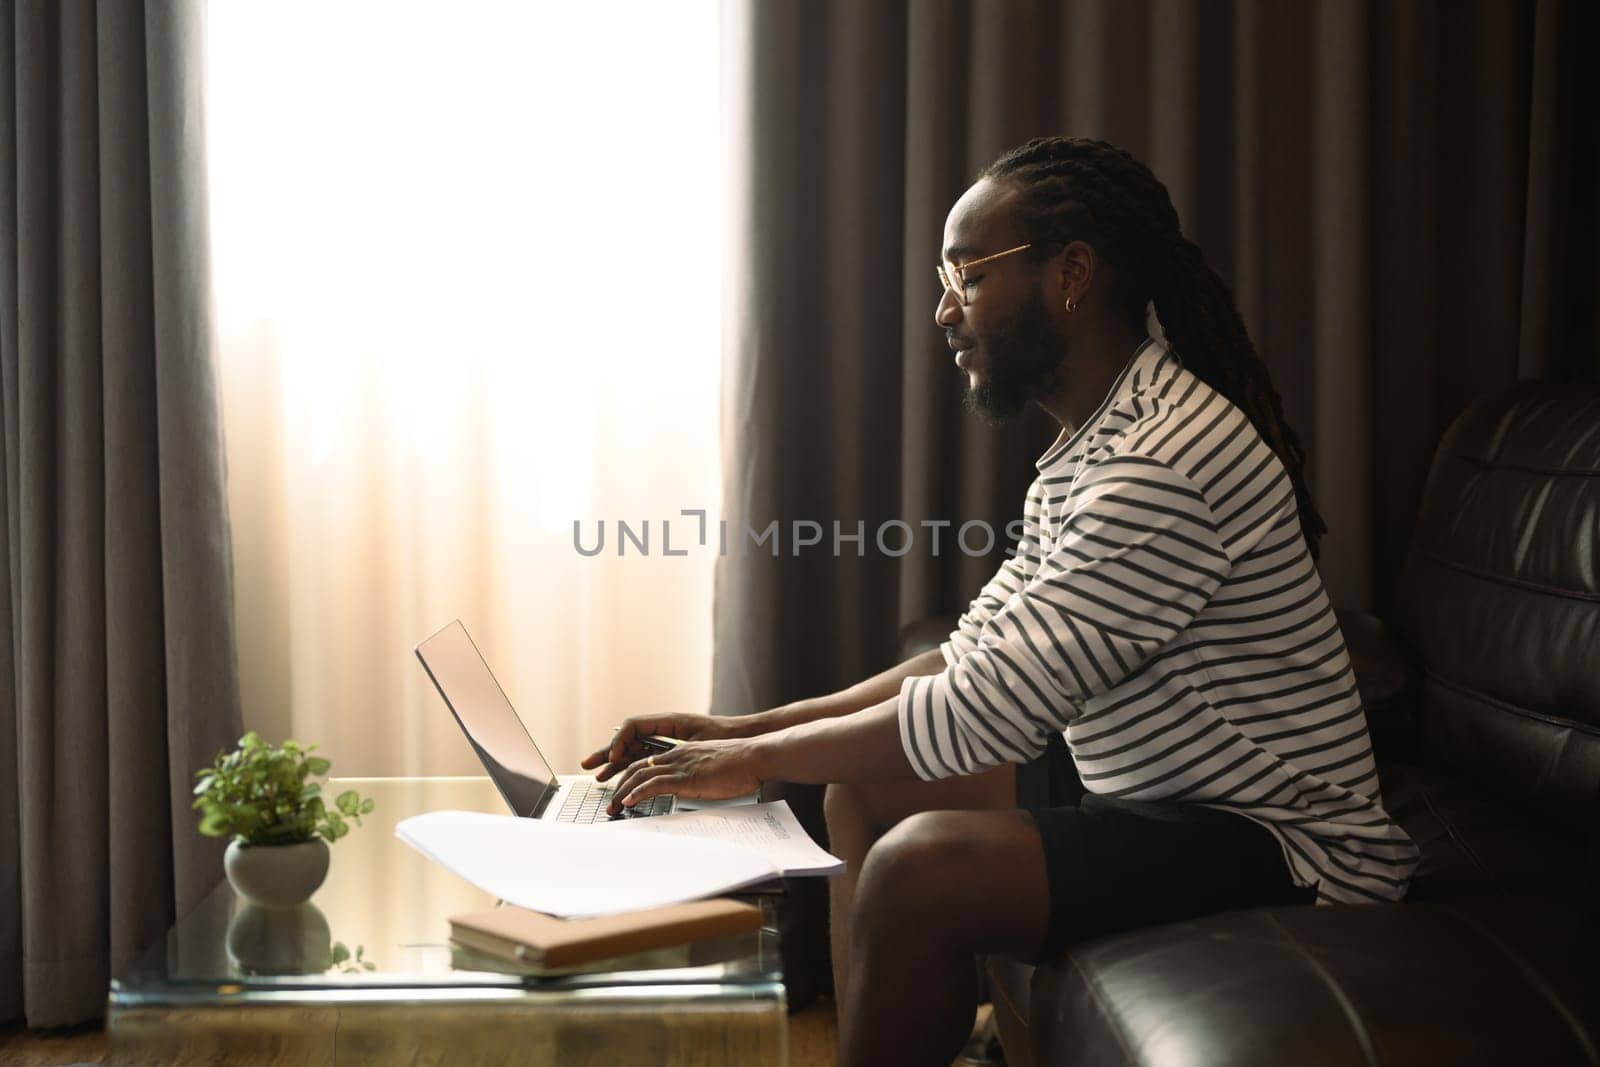 Young African man freelancer sitting on couch and working with laptop in living room.